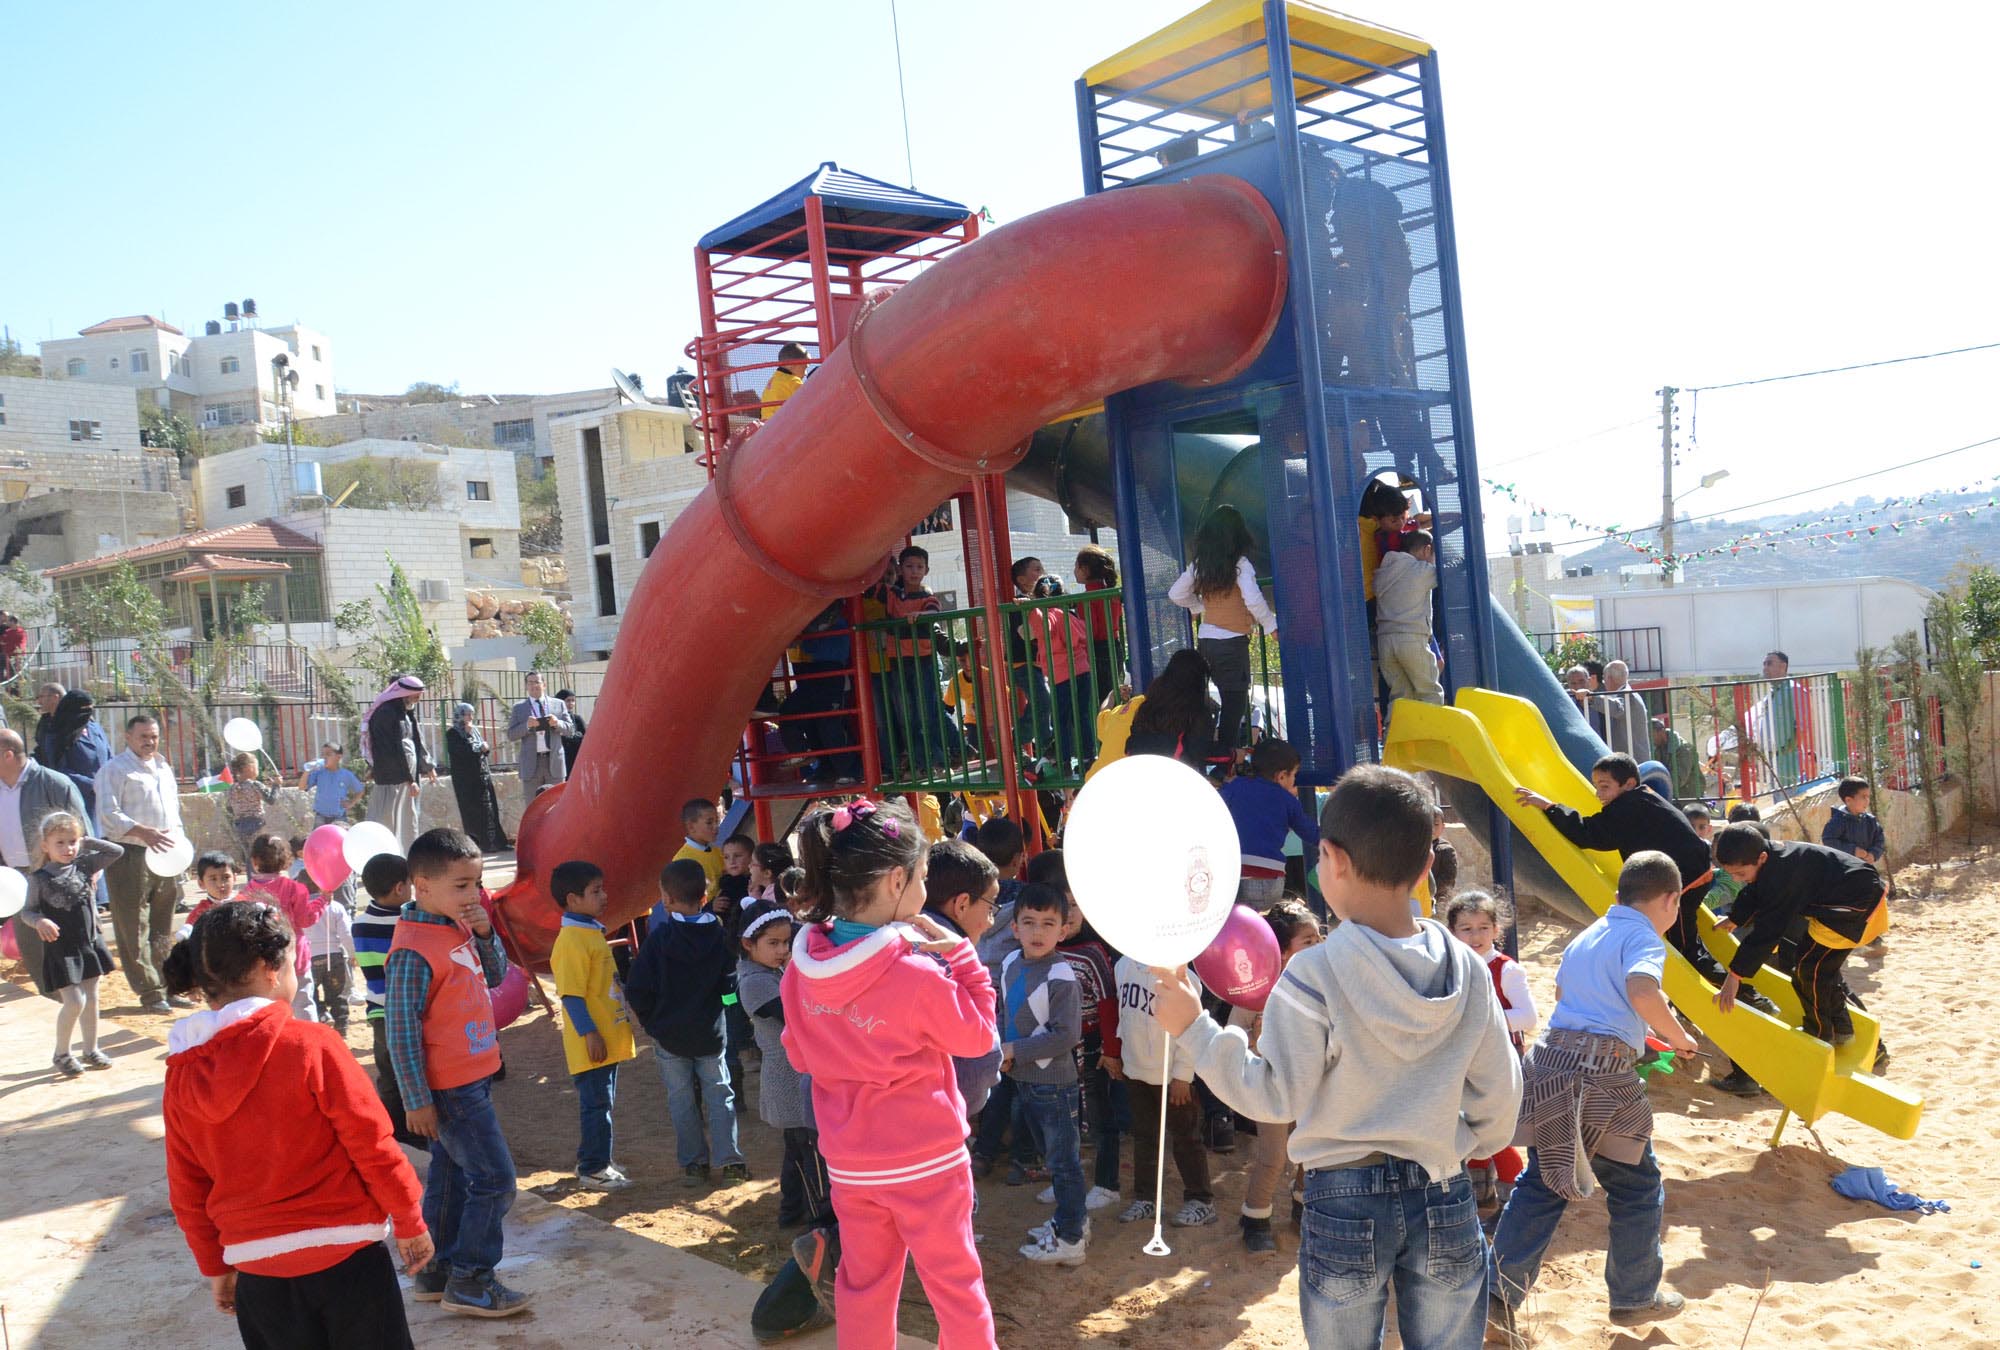 The jungle gym and other new, colorful playground equipment that Anera installed are a big hit with the children of the West Bank village of Abu Falah.